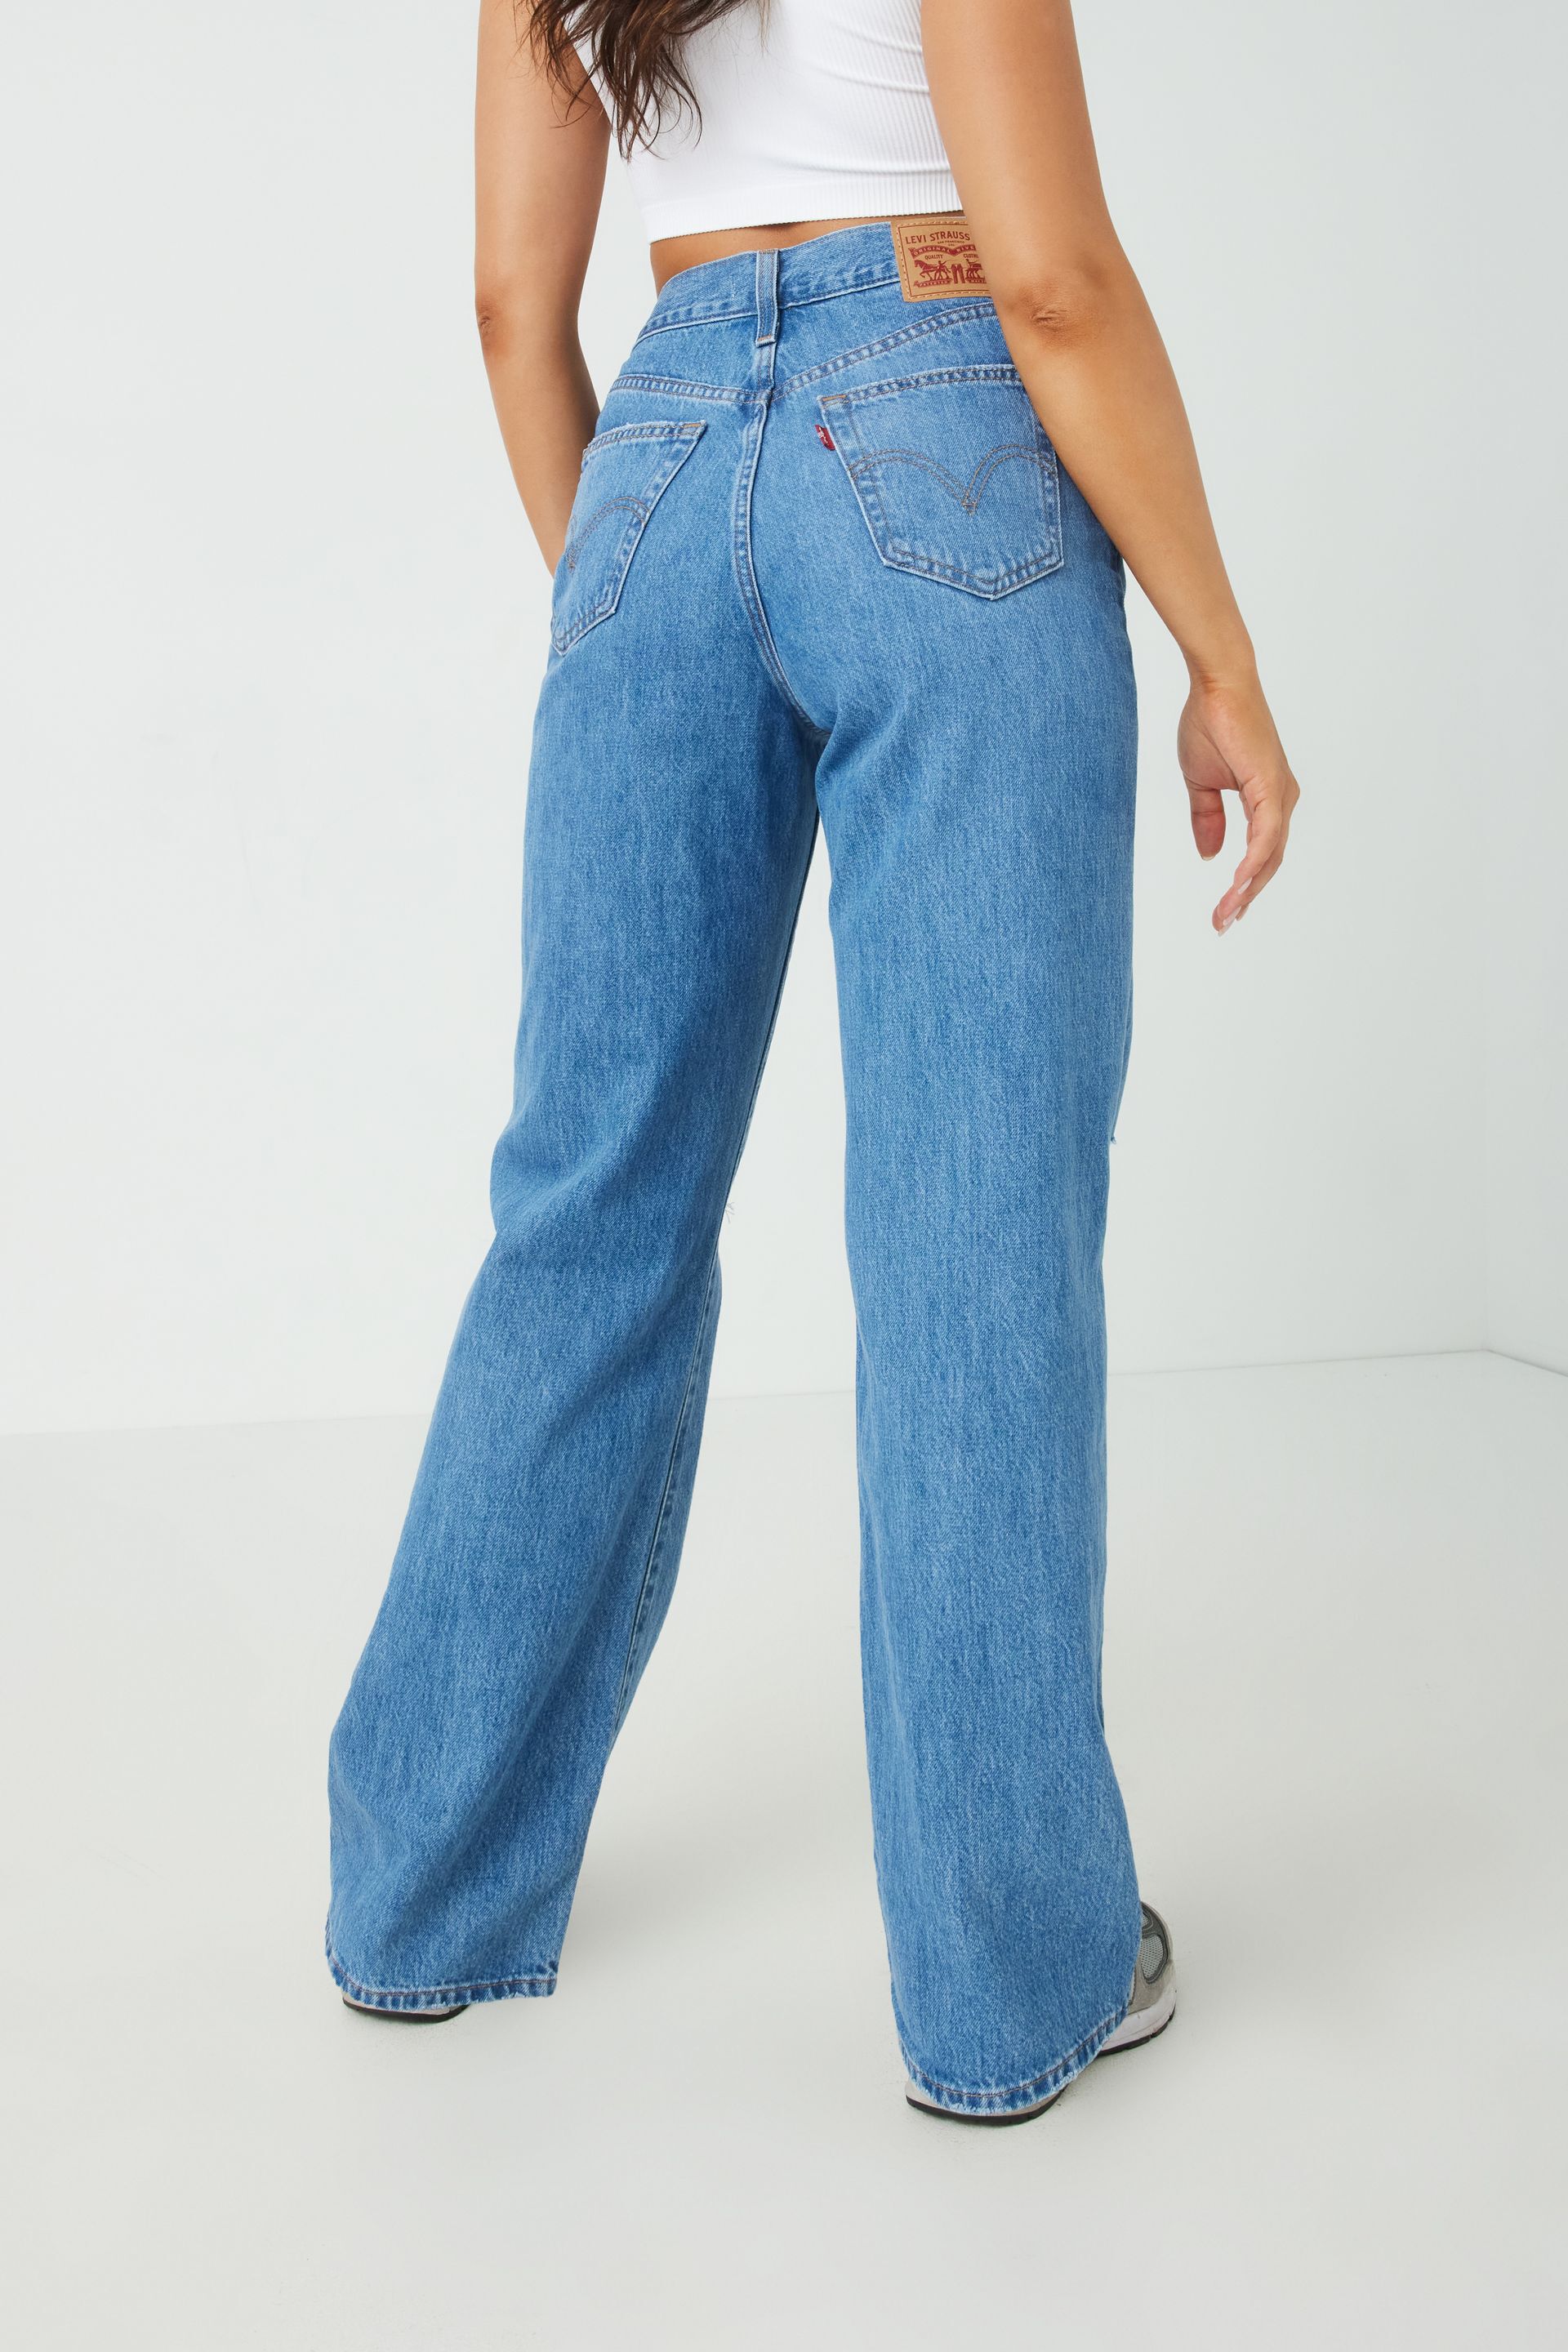 LEVI'S High Waisted Straight Ripped Jean